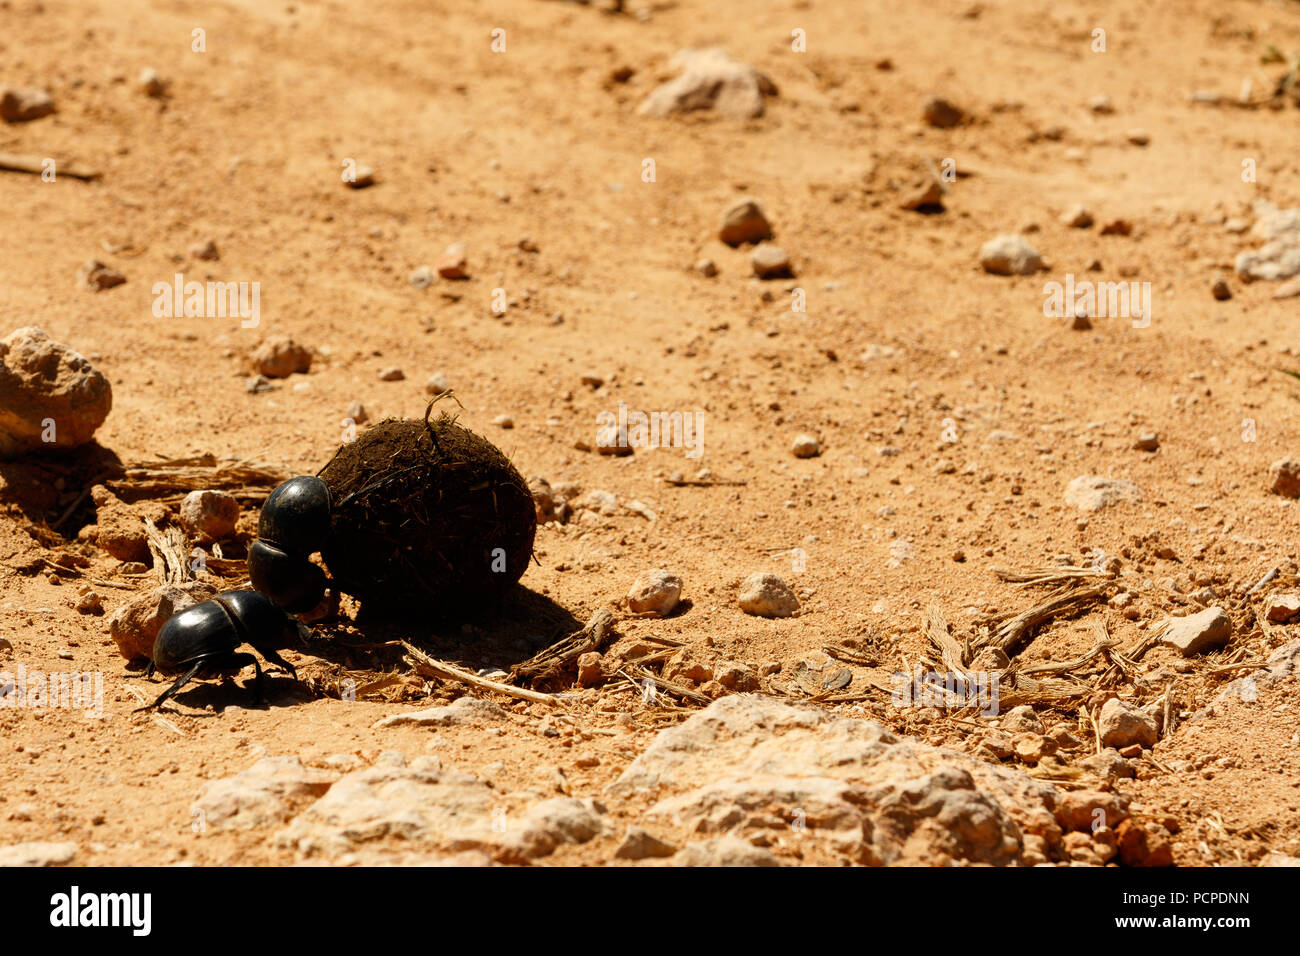 Dung beetle pushing a ball of dung across the gravel road Stock Photo